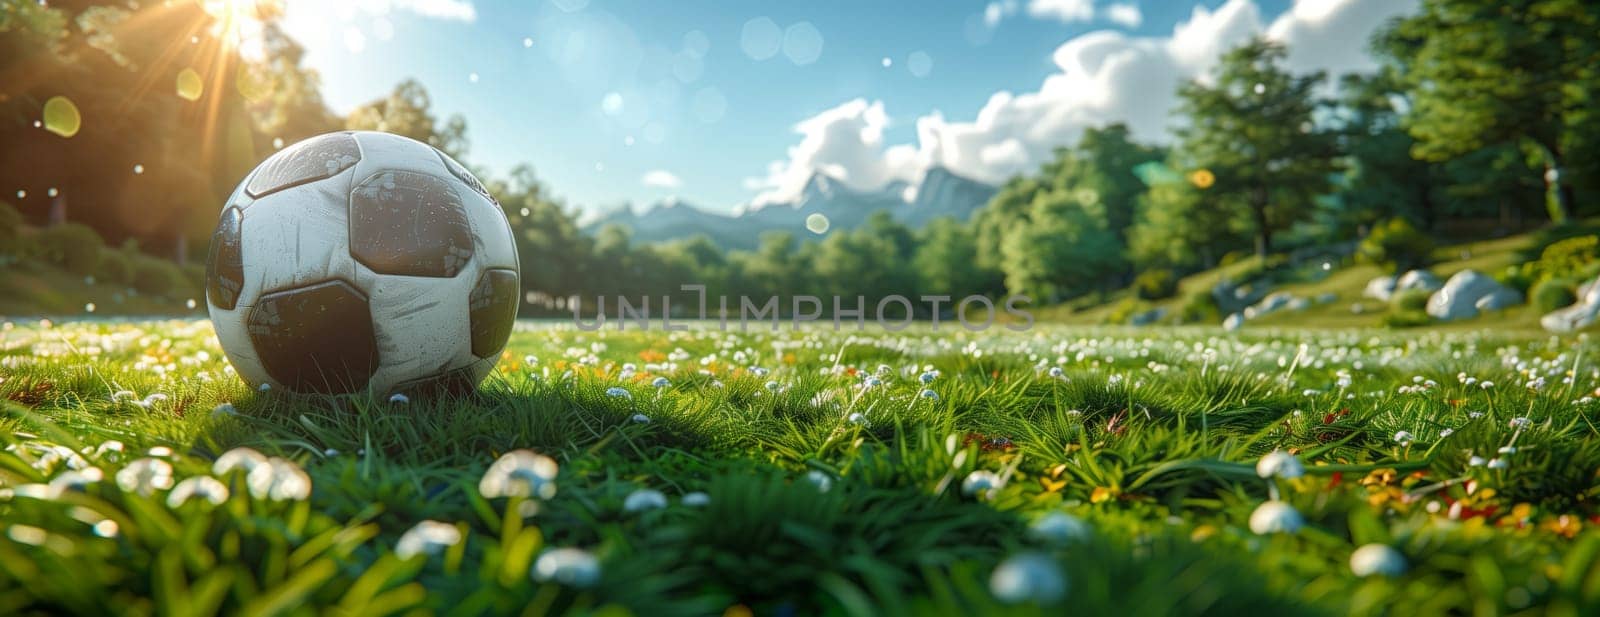 A soccer ball rests on a vibrant green field under the open sky by richwolf